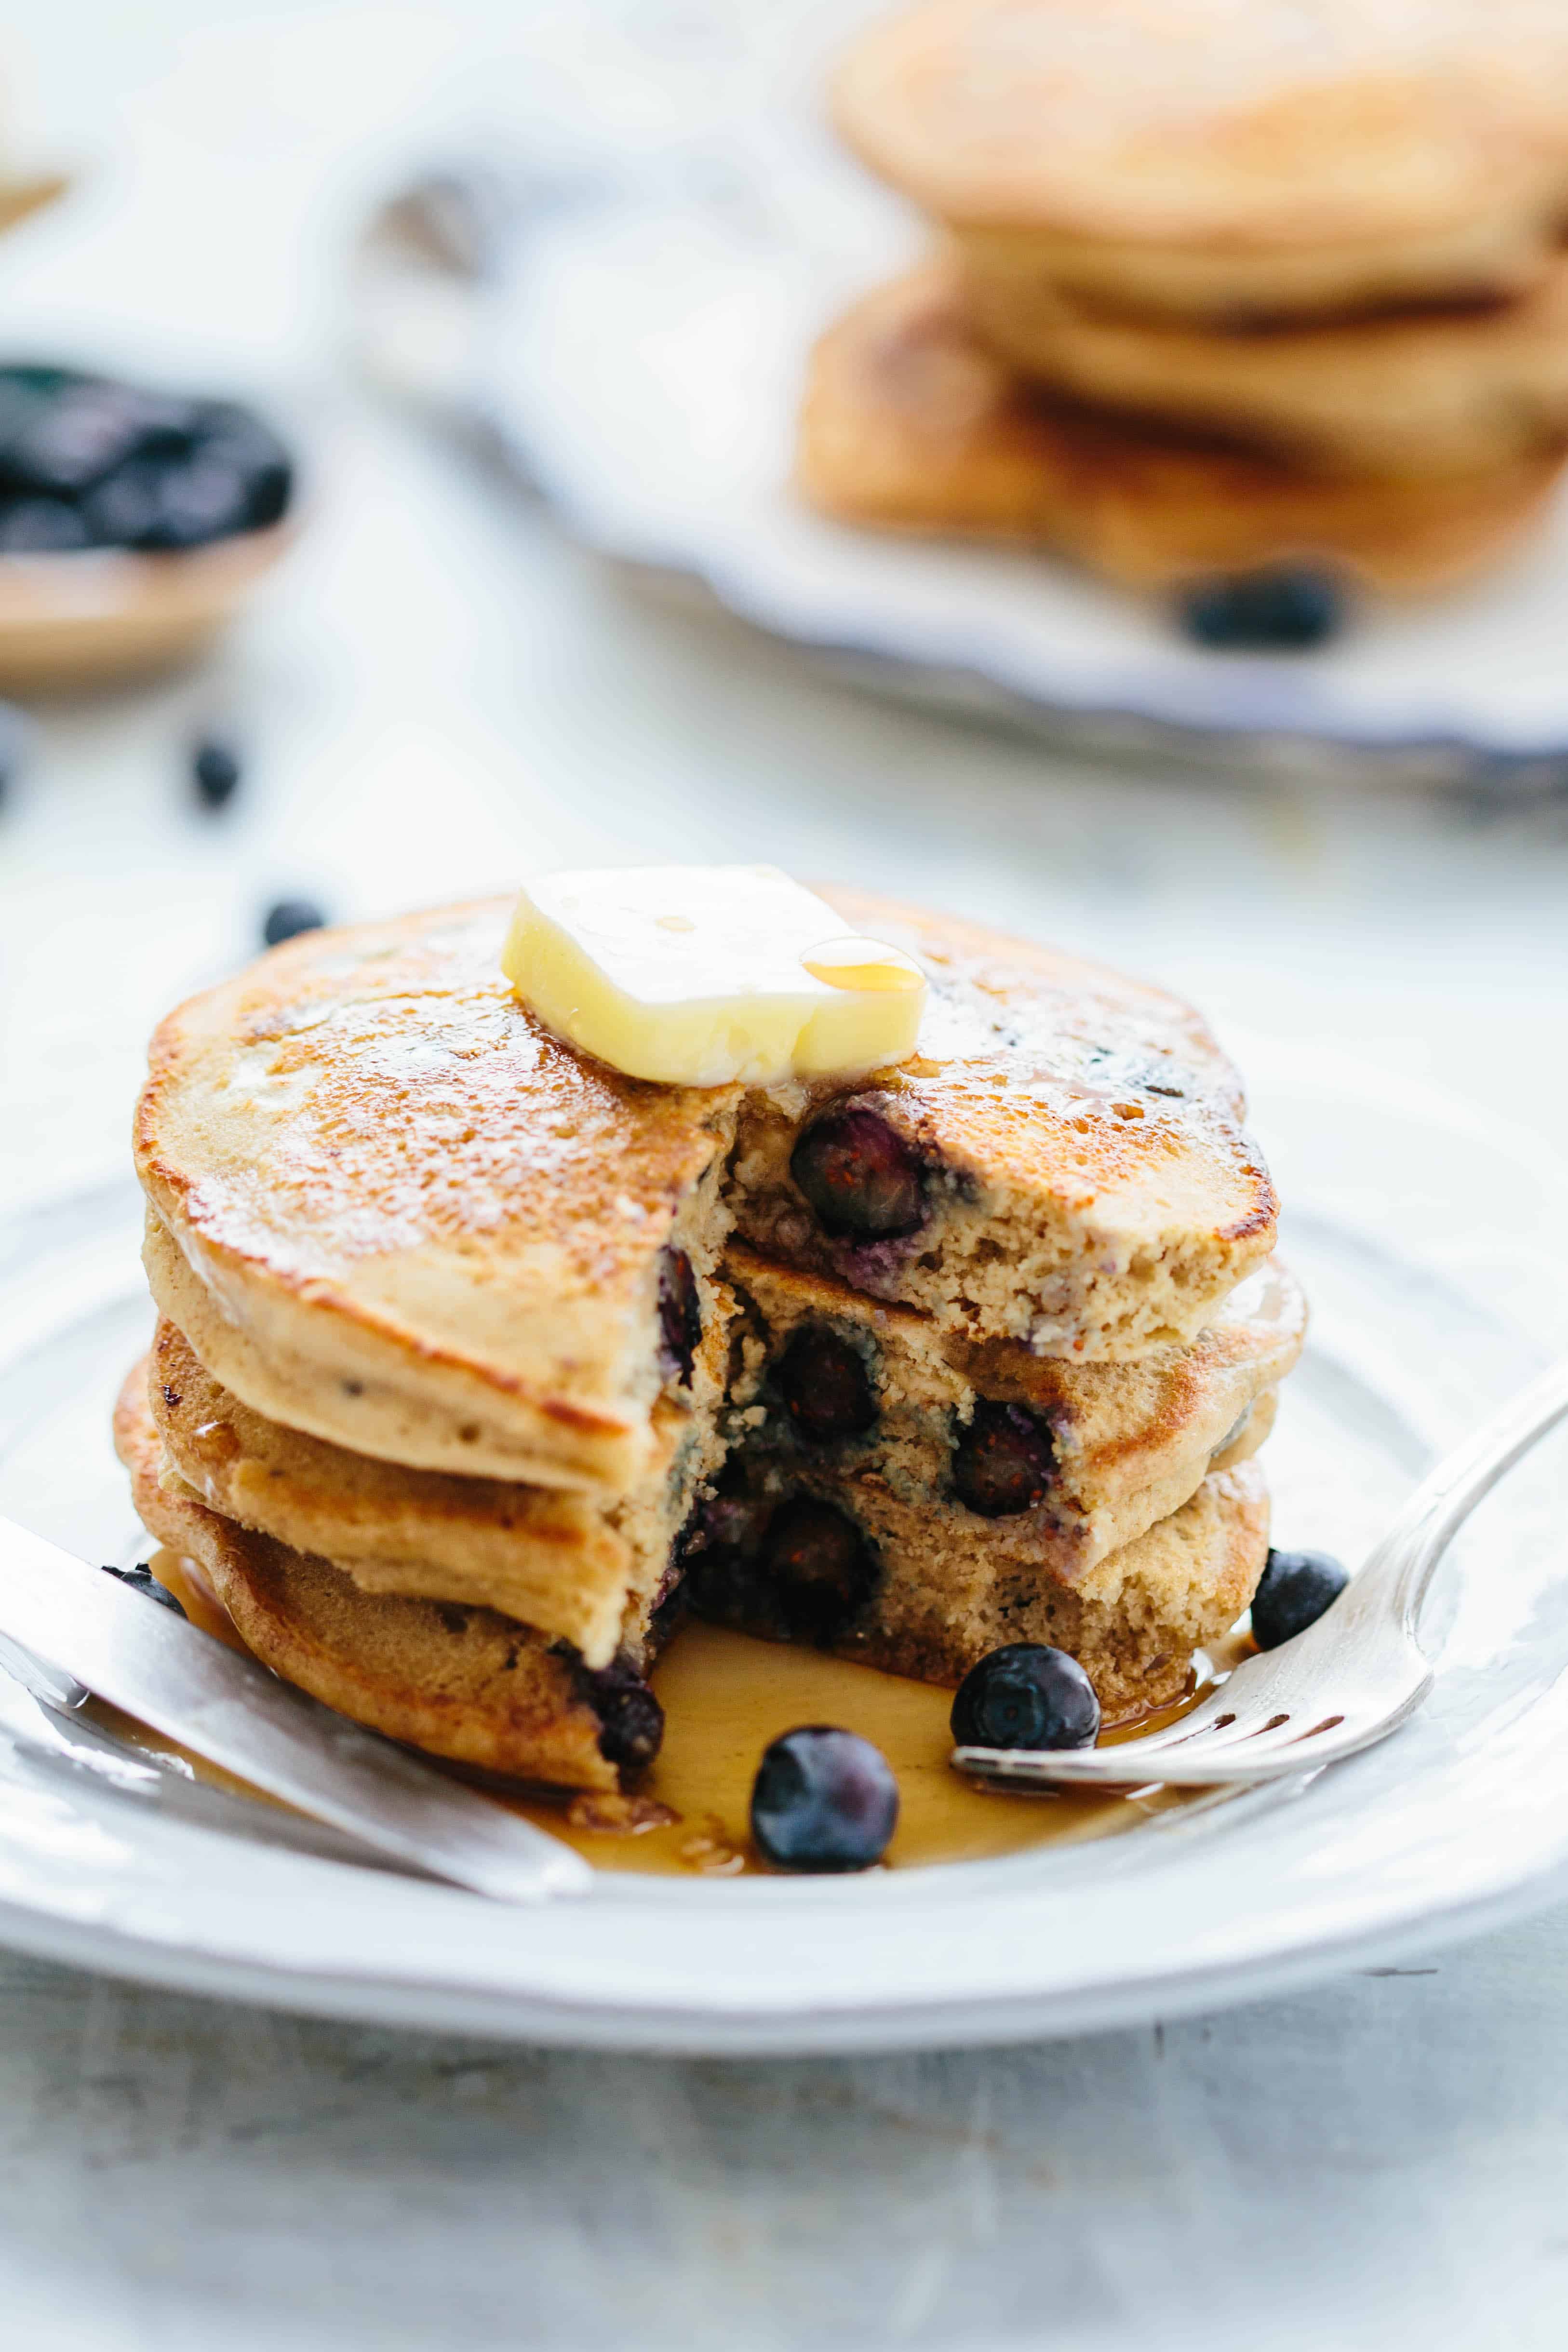 A close up of a stack of blueberry oatmeal pancakes that has a wedge sliced out of them.